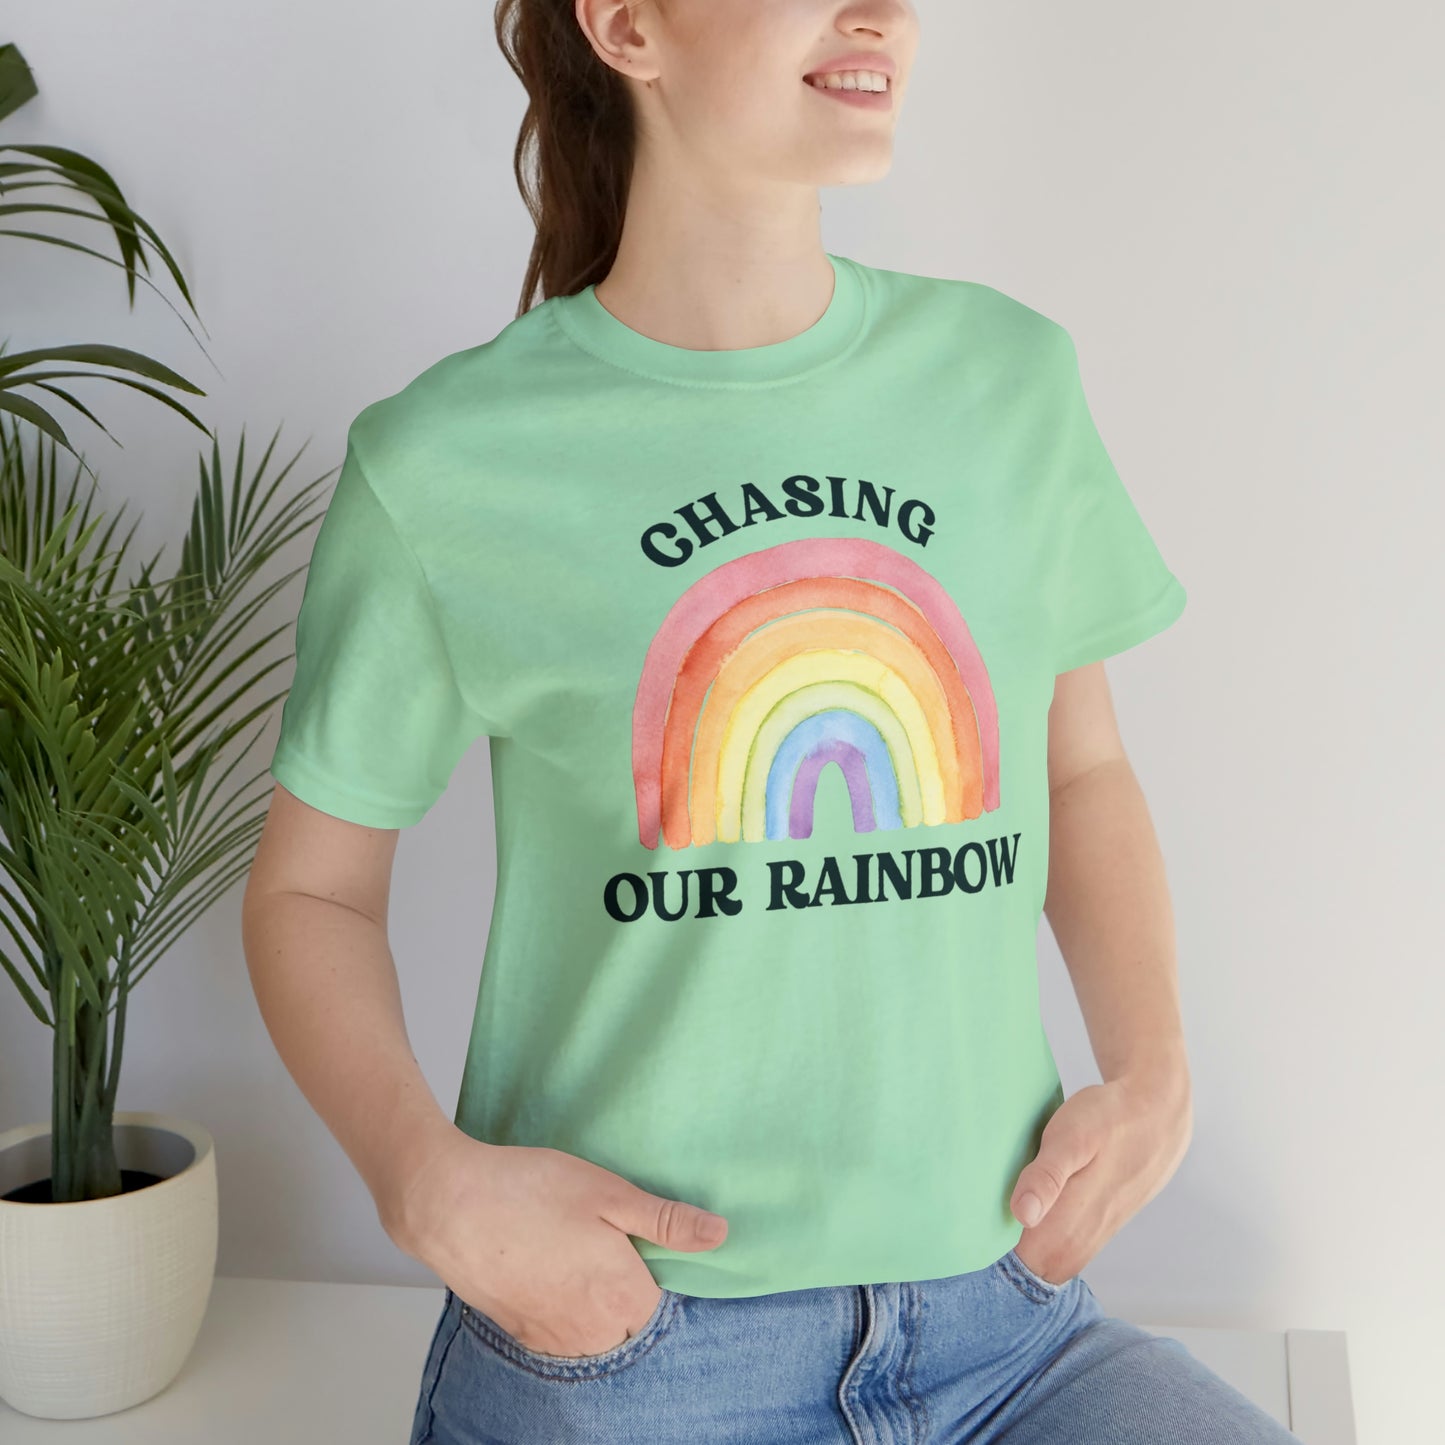 Chasing Our Rainbow